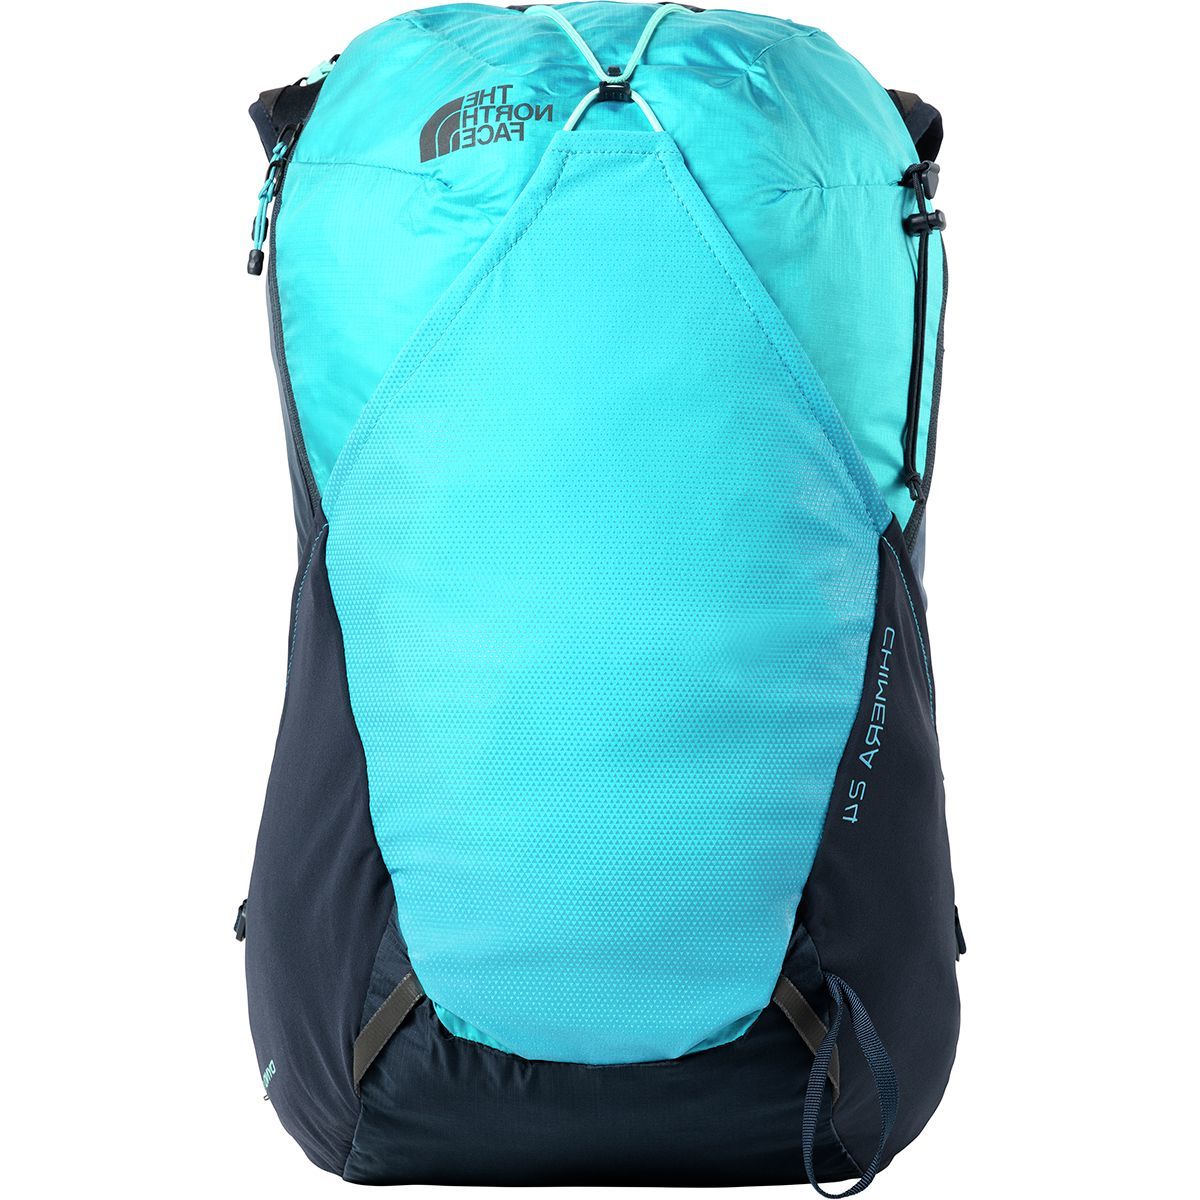 The North Face Chimera 24L Backpack - Women's